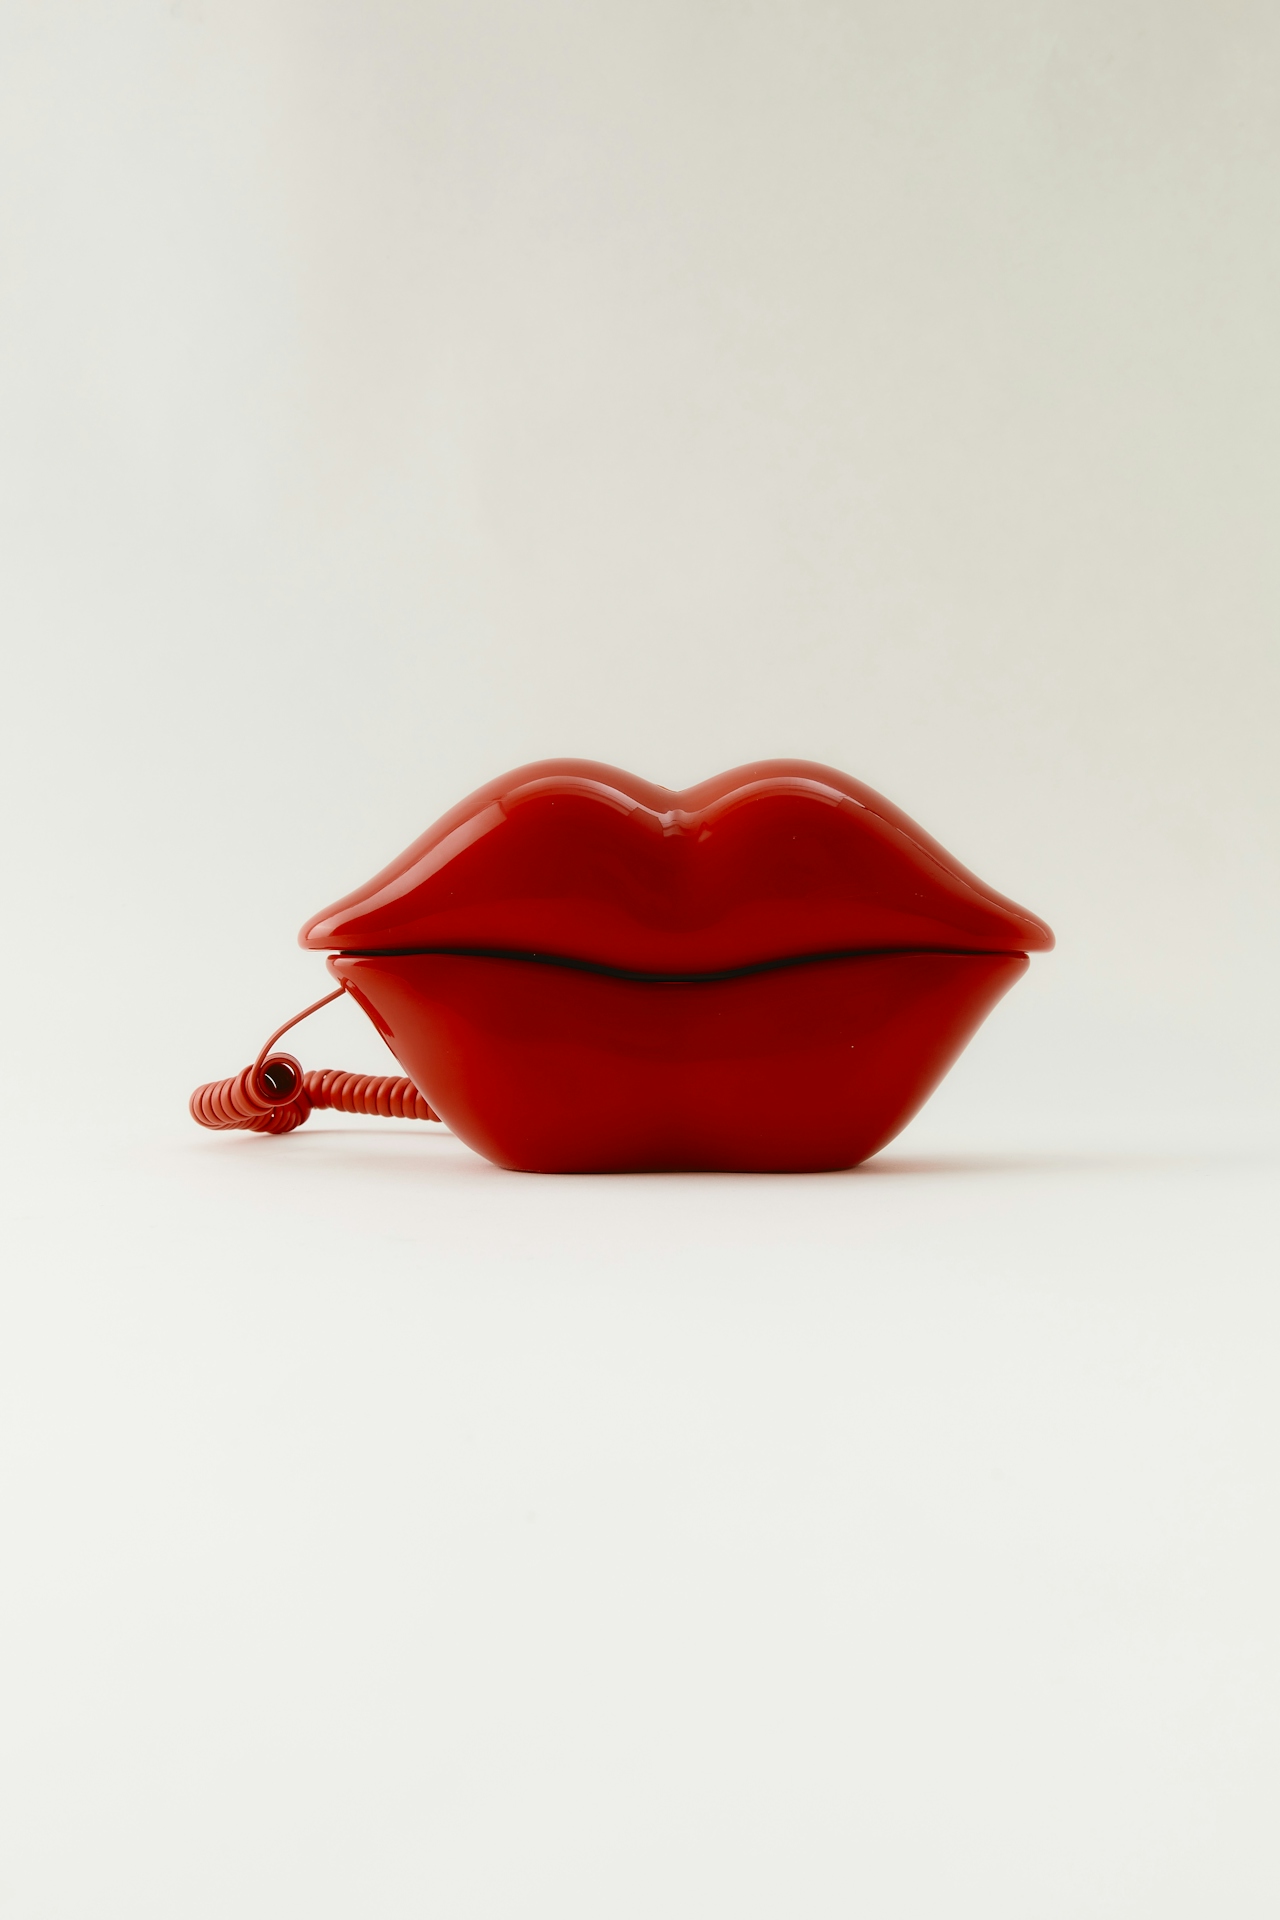 A photo of a phone shaped like lips for the featured image in GETSOME's Ask a Sex Therapist blog content.